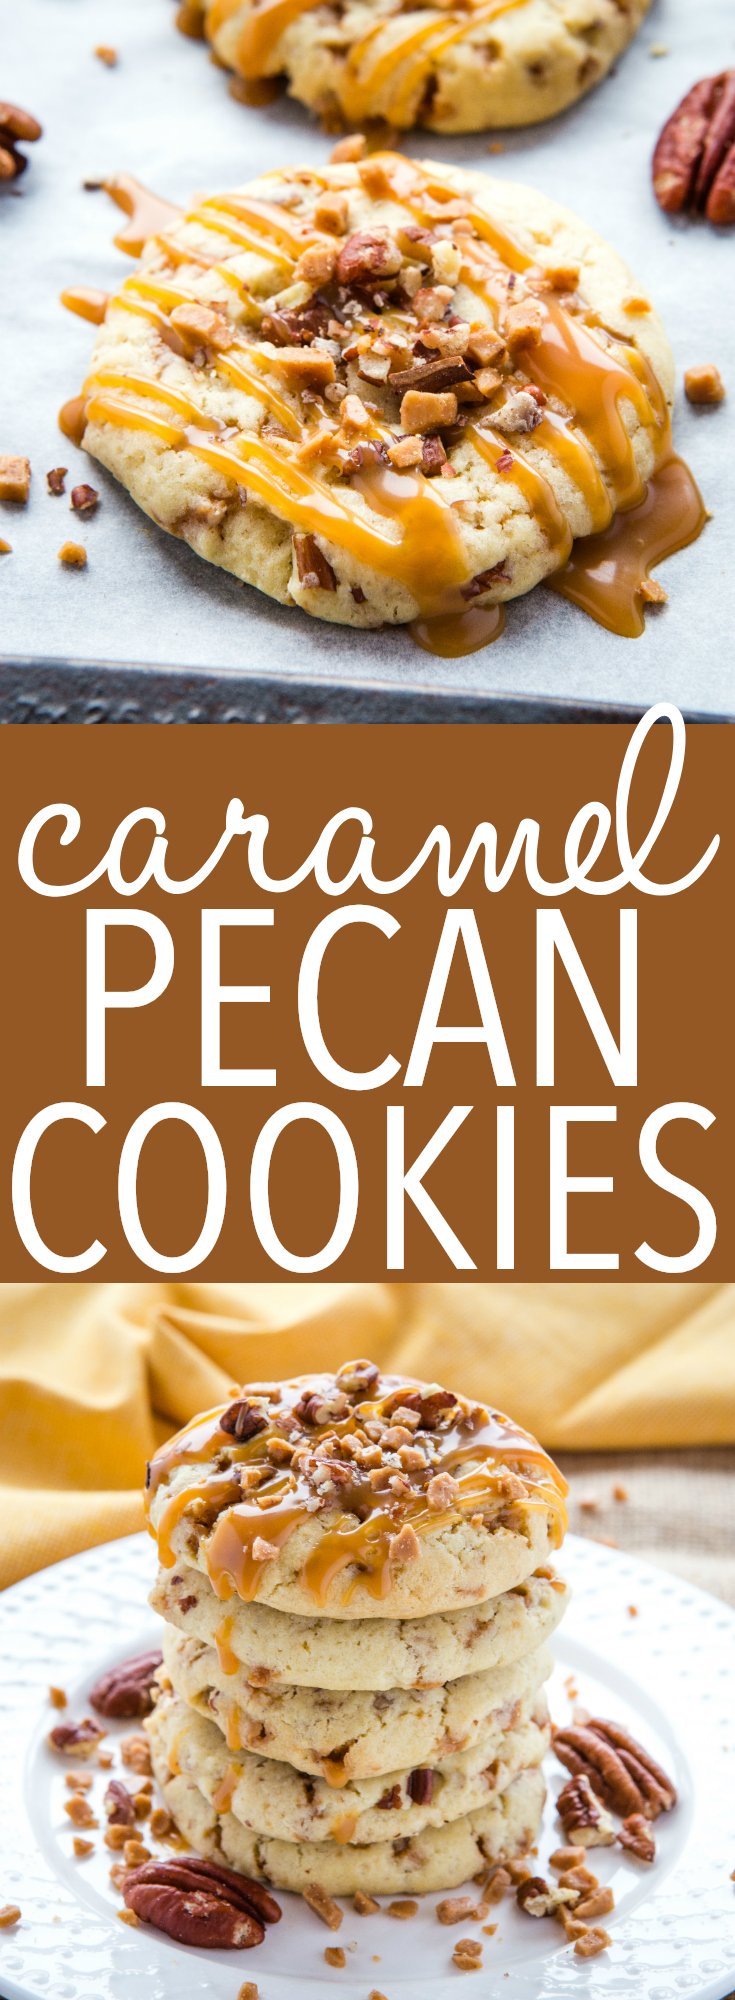 These Caramel Butter Pecan Cookies are the perfect easy-to-make drop cookies for caramel lovers made with chopped pecans! Recipe from thebusybaker.ca! #butterpecan #caramel #cookies #homemade #recipe #easyrecipe #homesteading #skor #butterscotch #sugarcookies #cookie via @busybakerblog